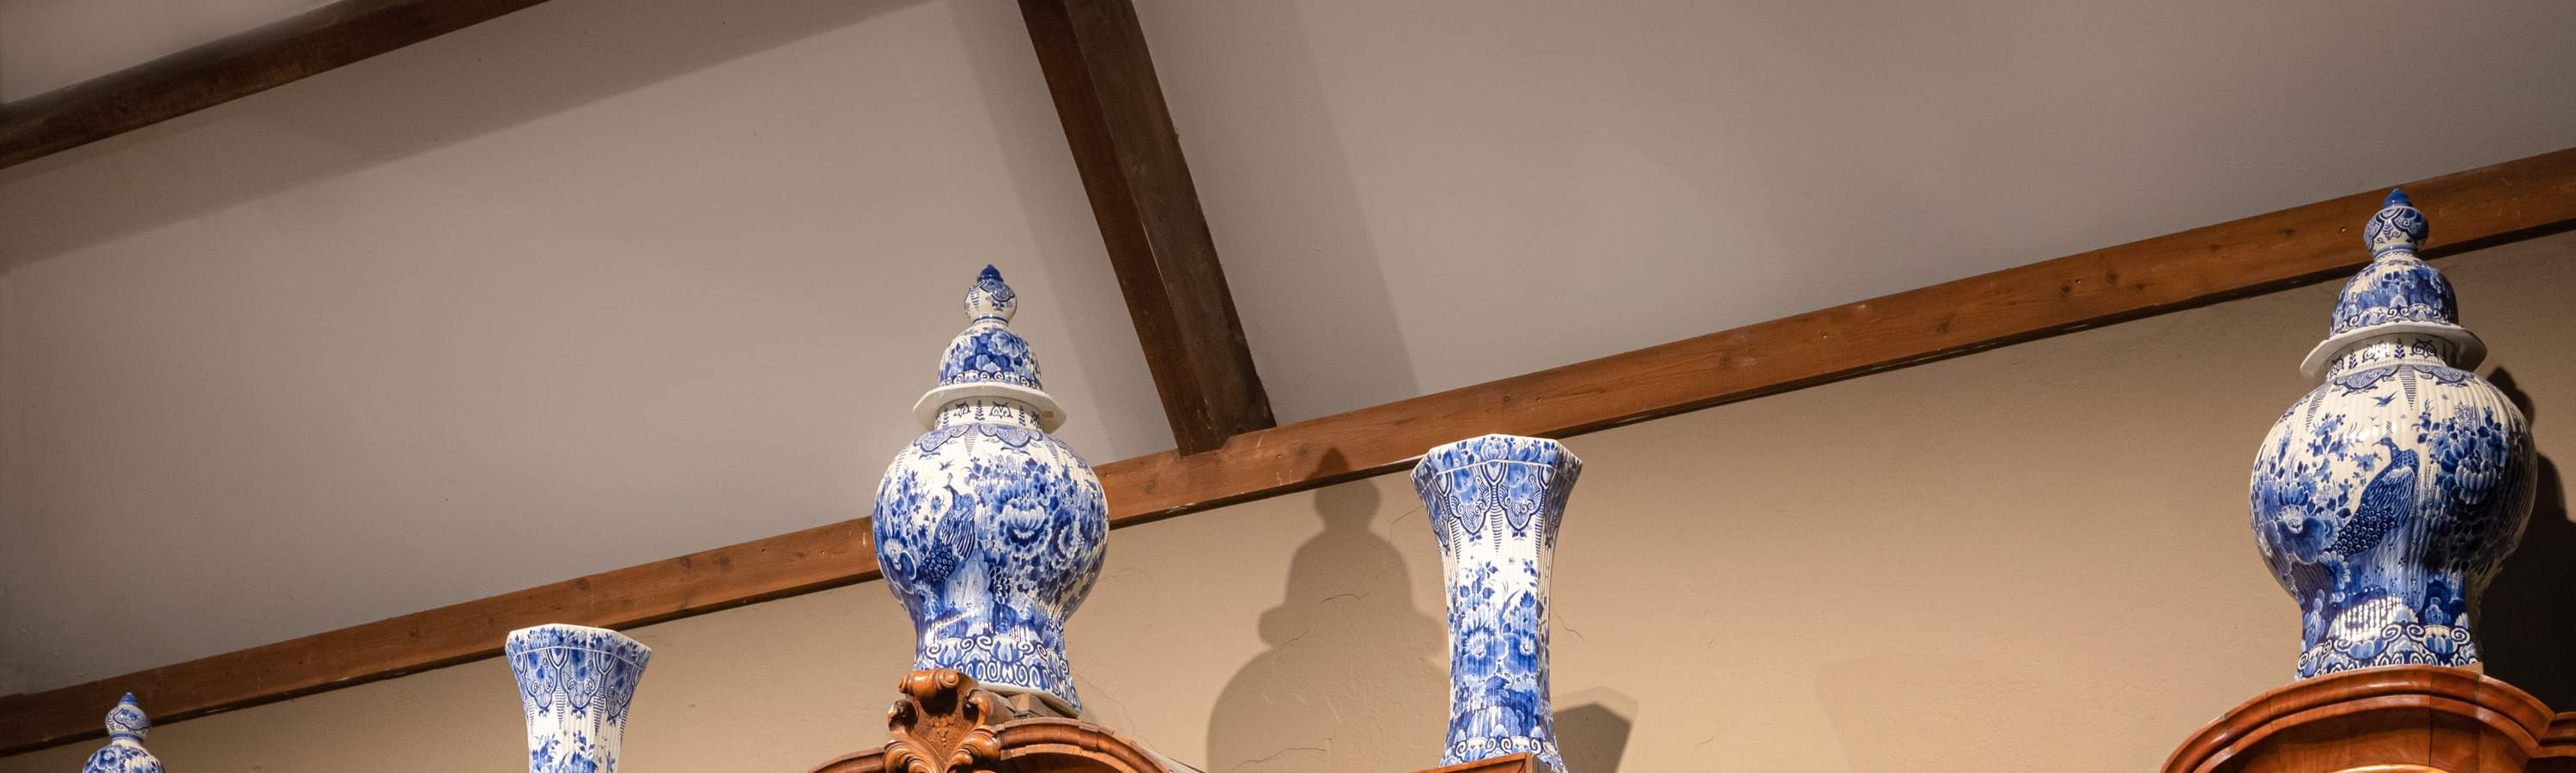 Royal Delft Factory and Museum Admission